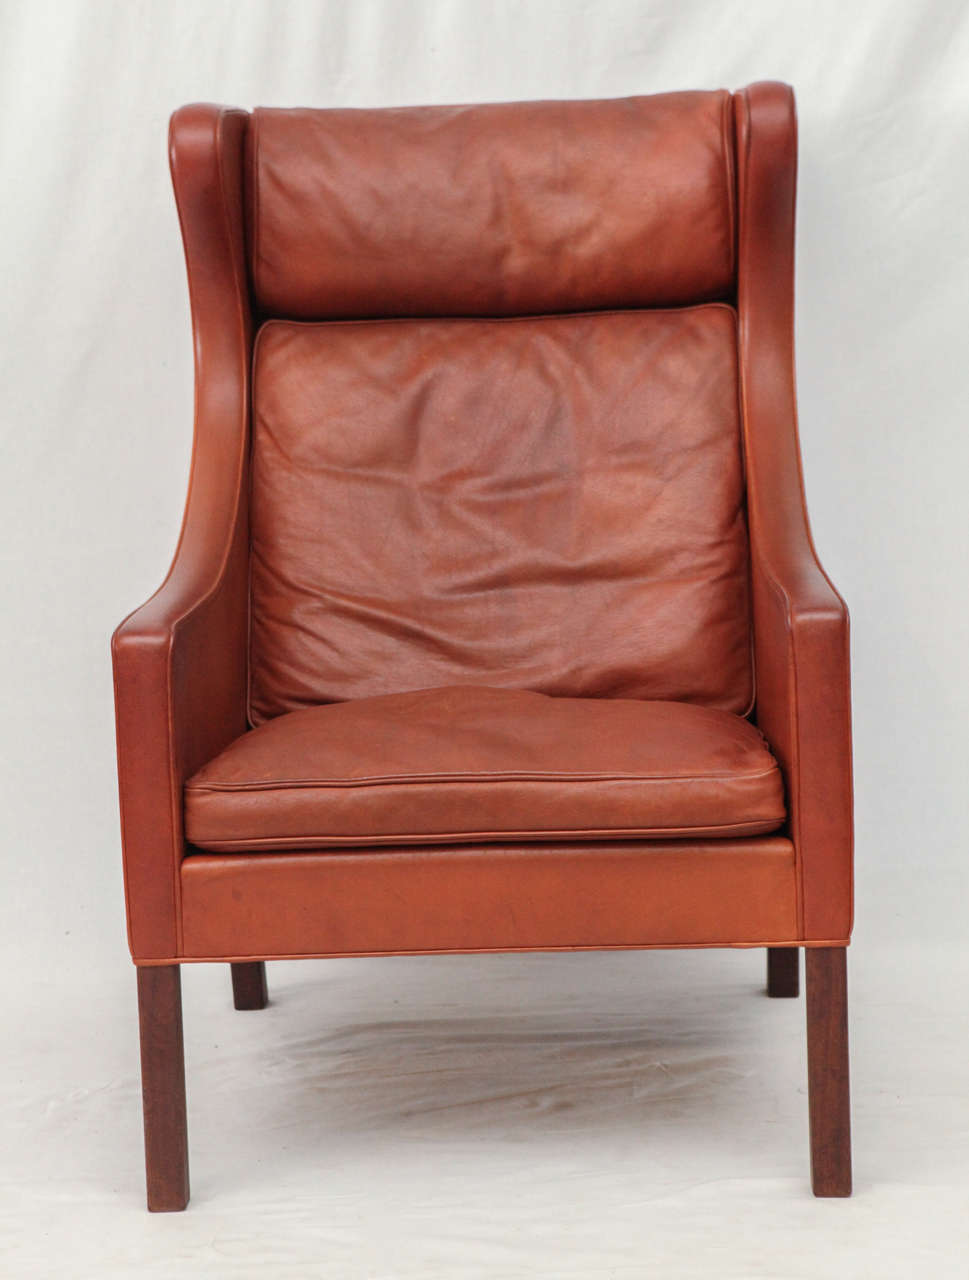 Borge Mogensen Leather Wingback Chair Designed in 1964 And Produced By Fredericia Stolefabrik